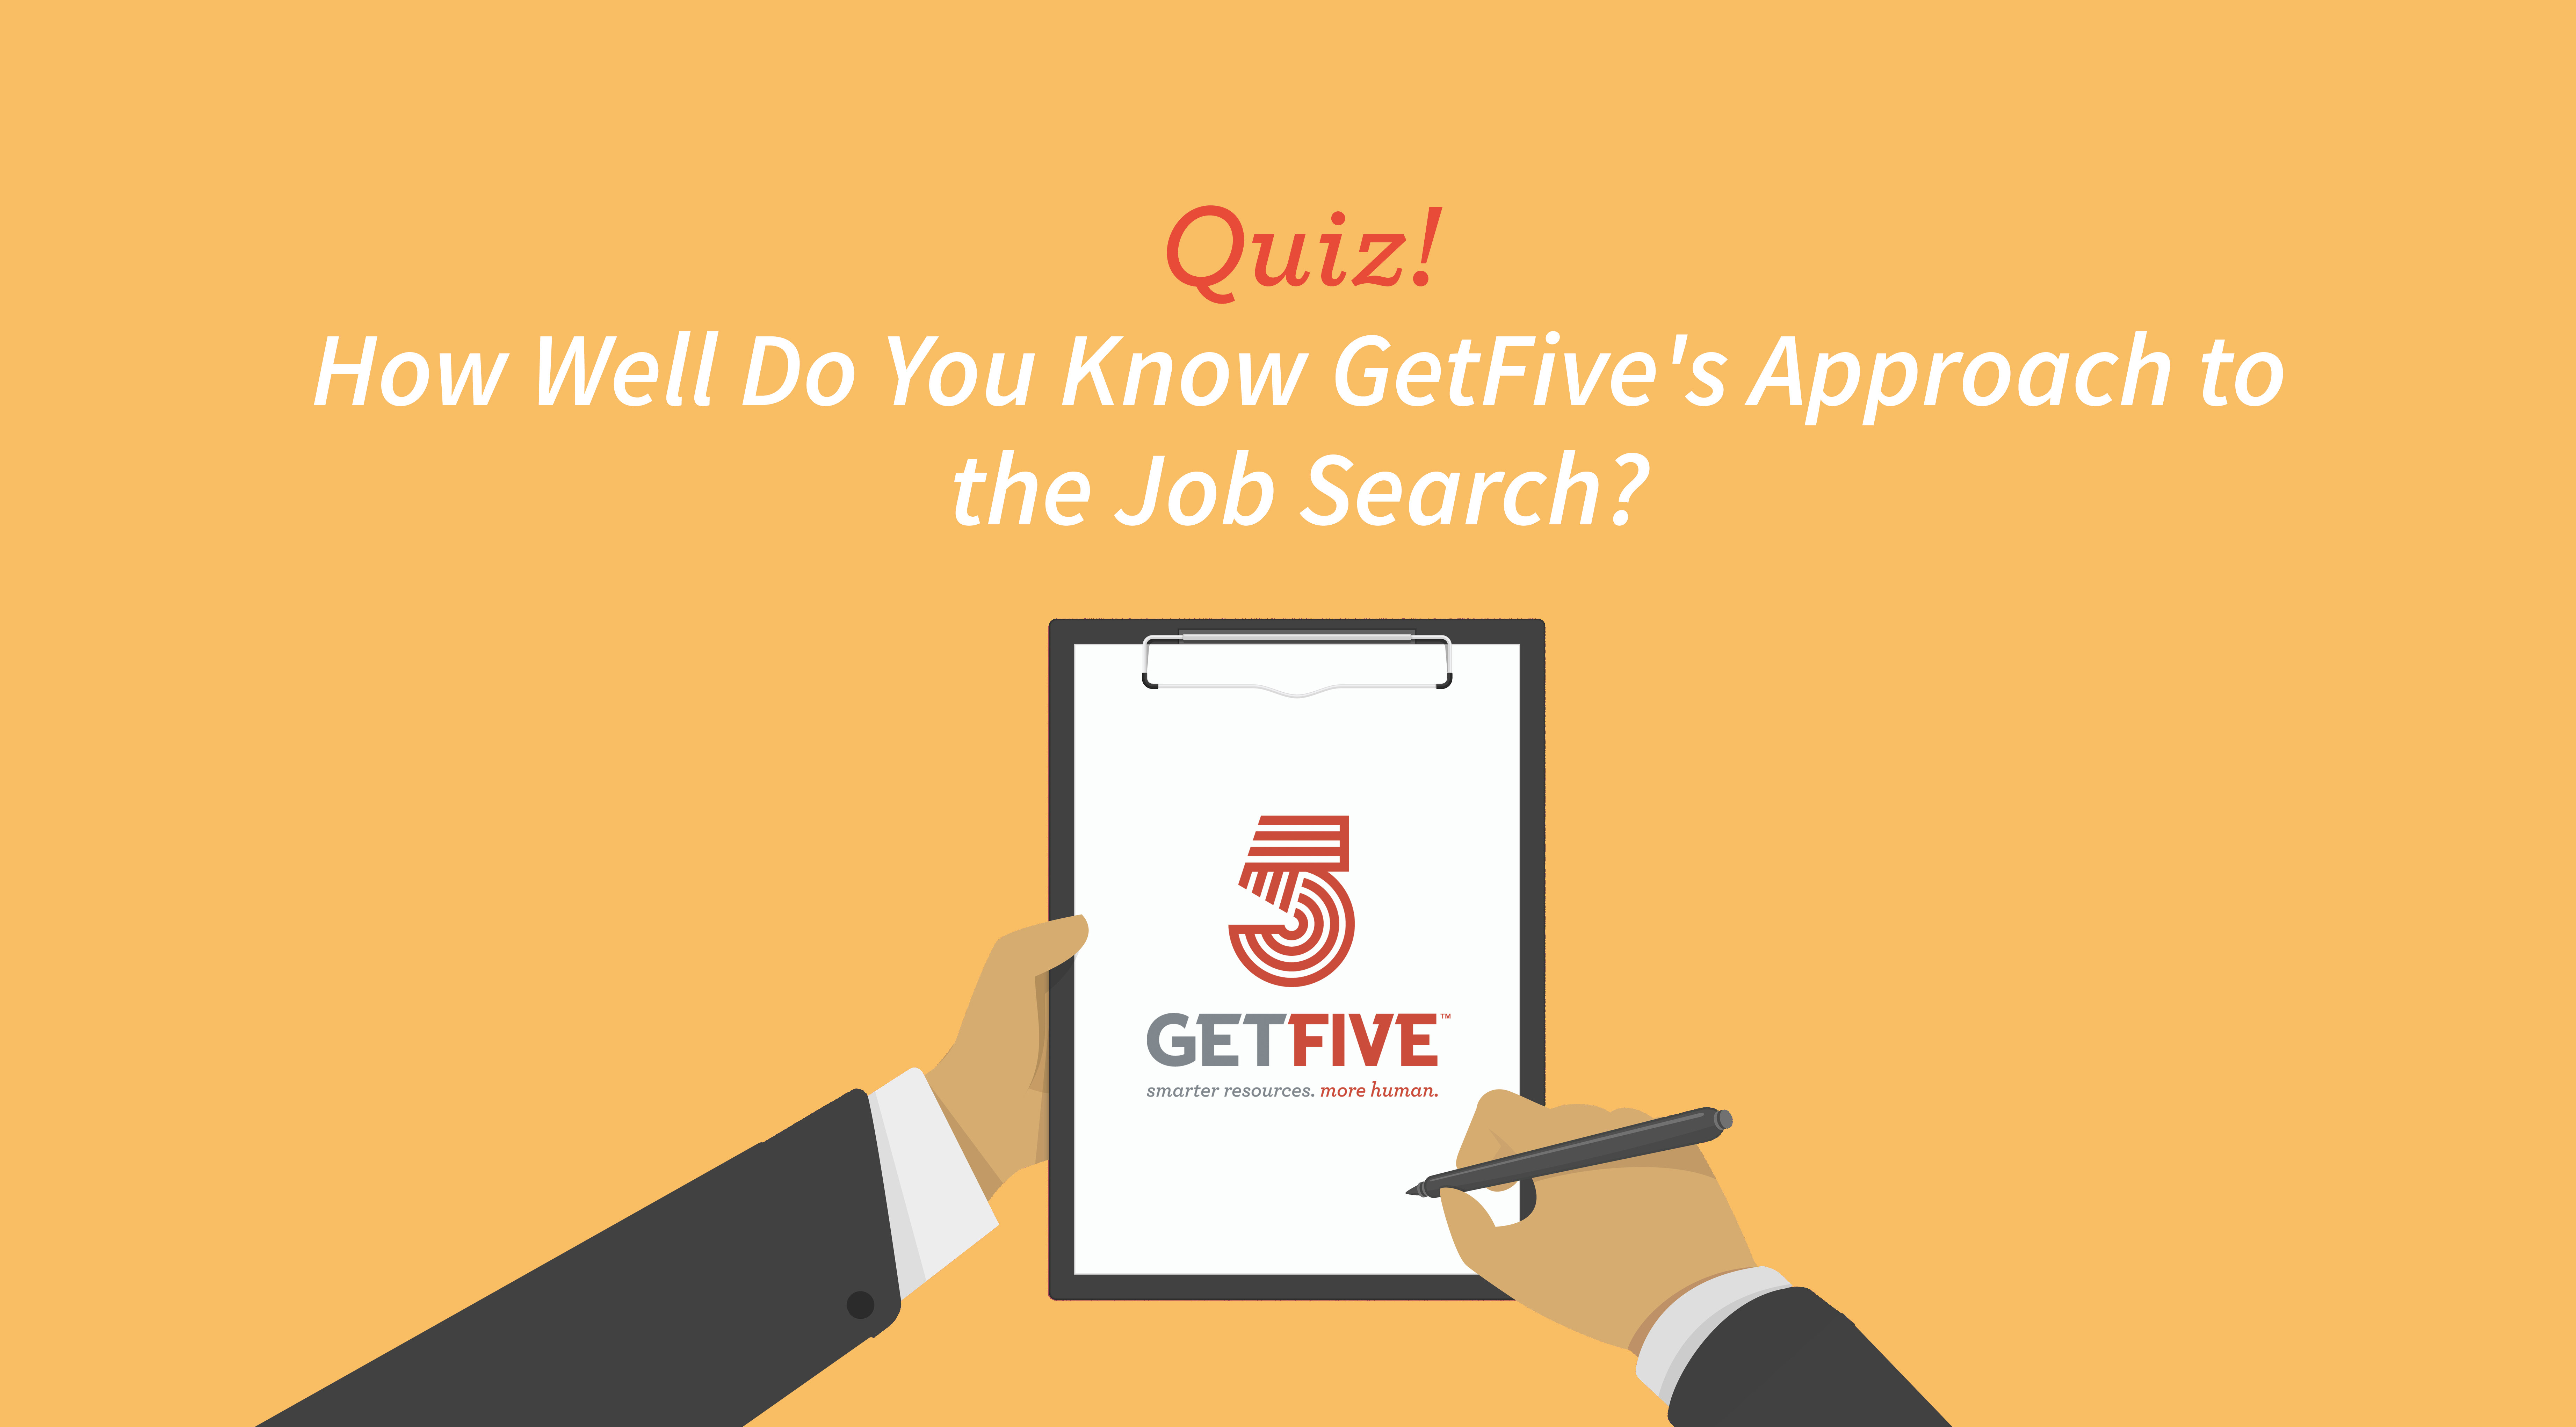 QUIZ! How Well Do You Know GetFive’s Approach to the Job Search?